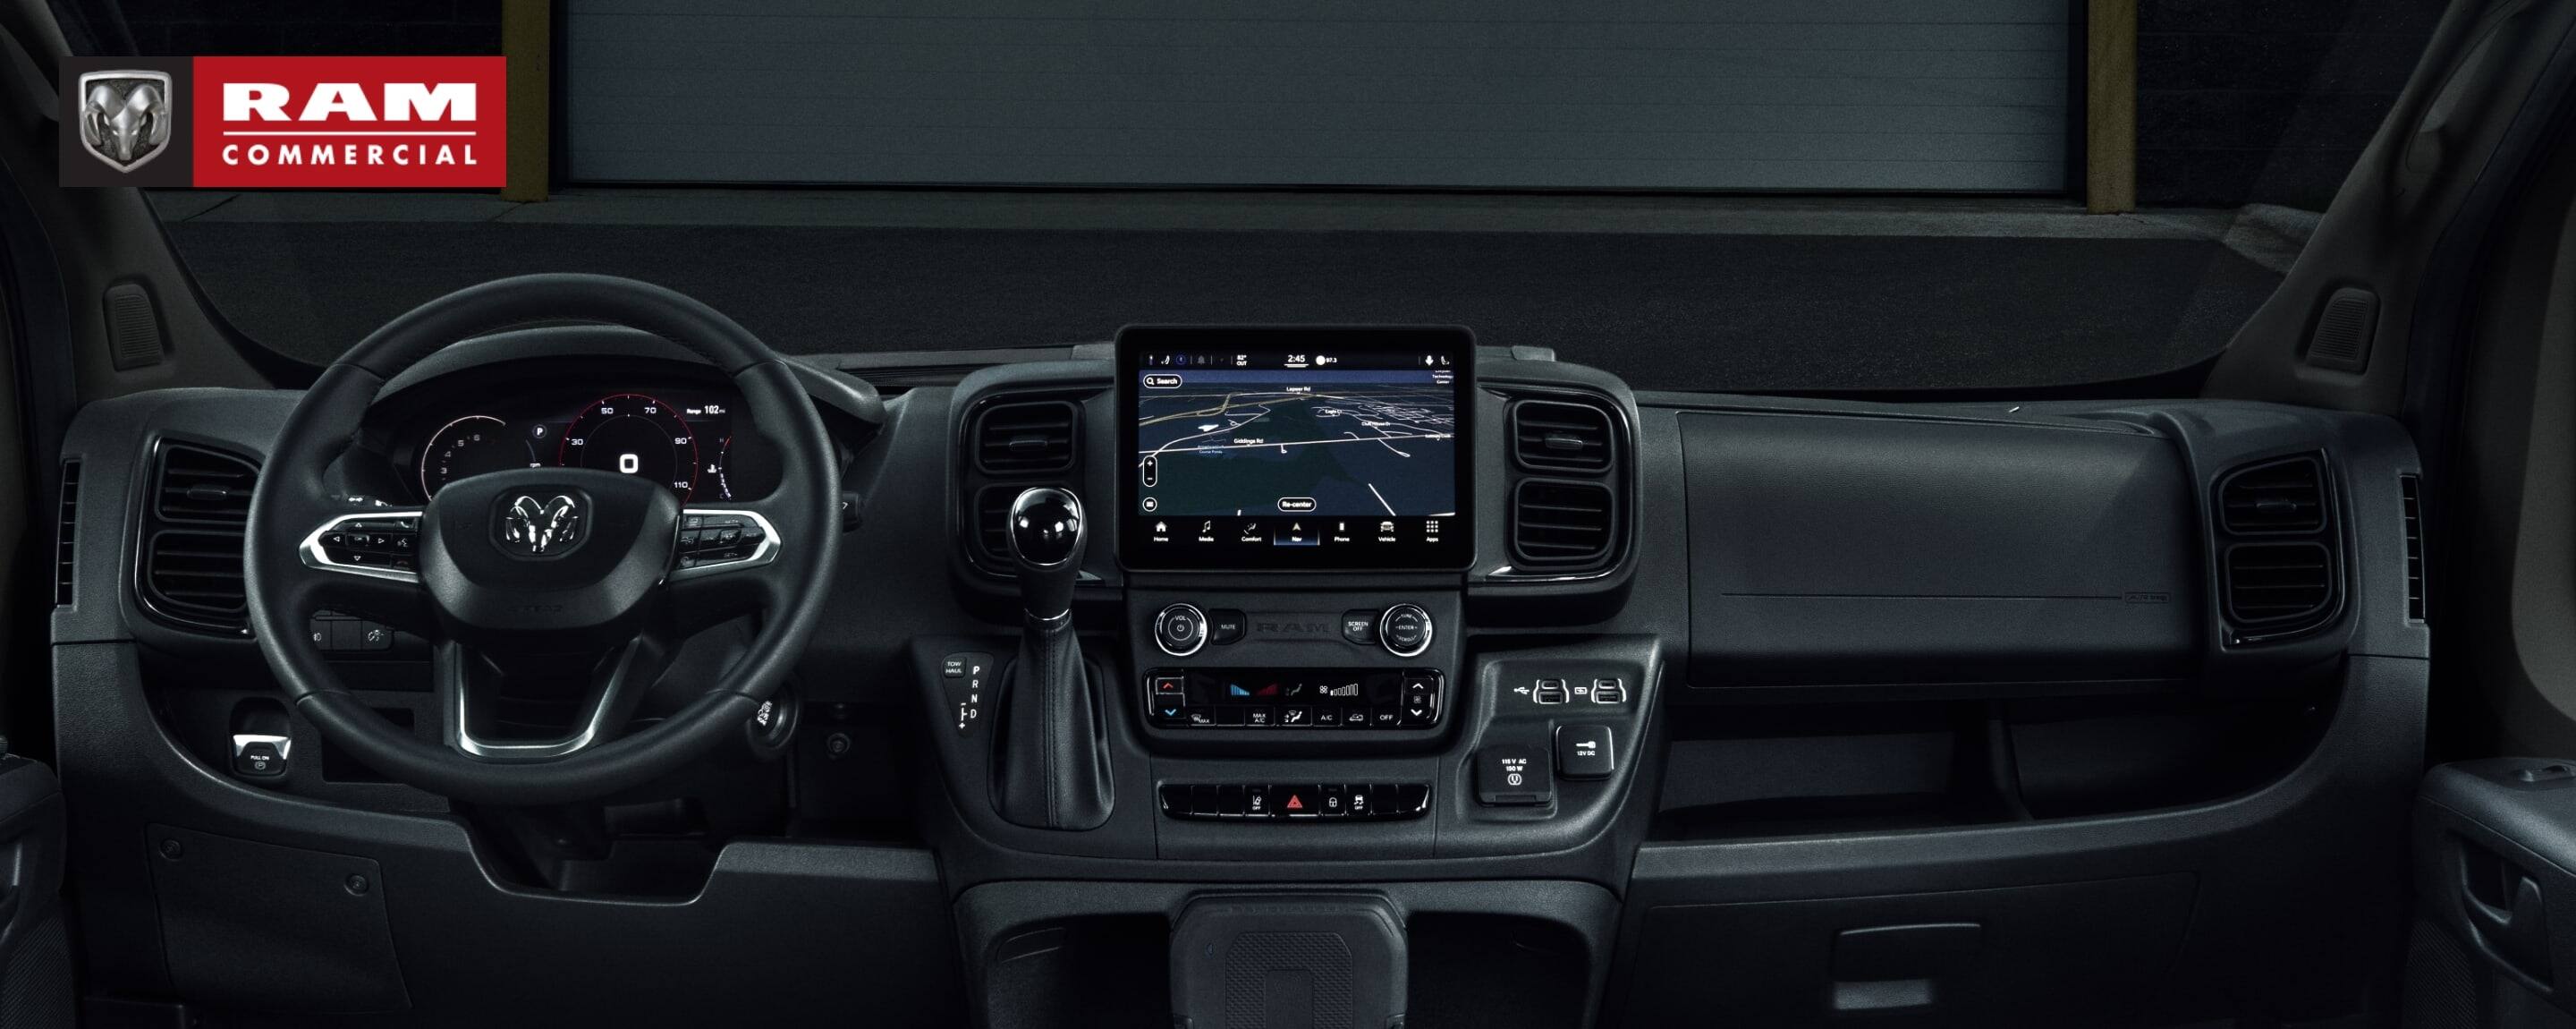 The steering wheel, Uconnect touchscreen, center stack controls and dash in the 2022 Ram ProMaster. Ram Commercial.